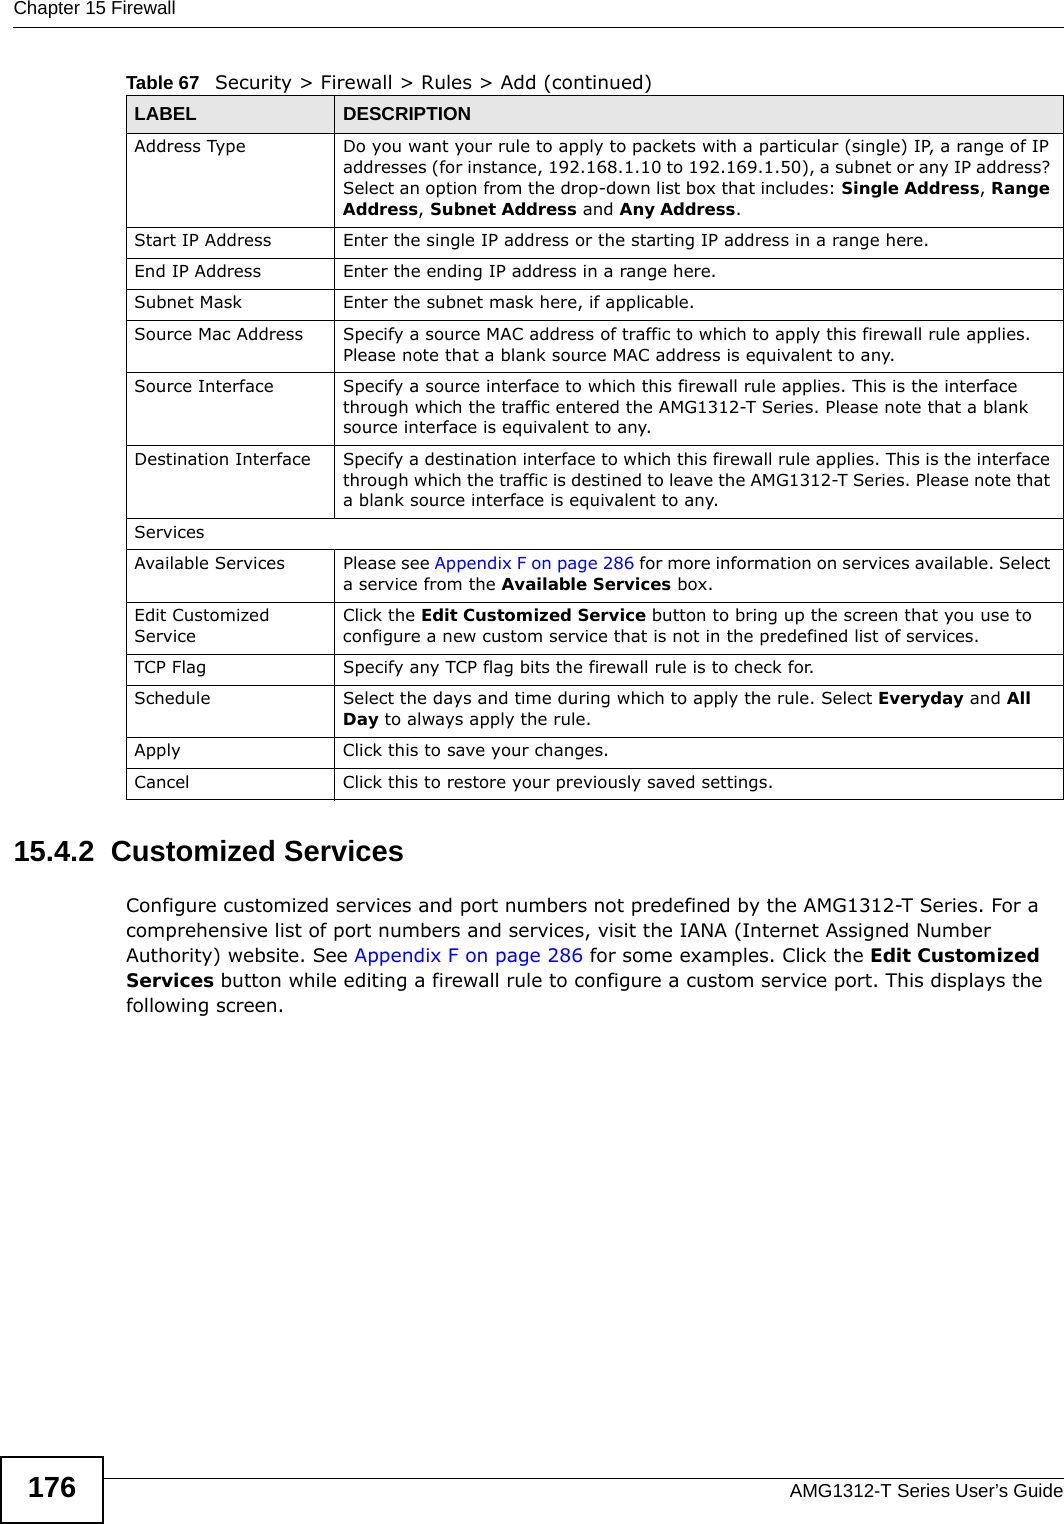 Chapter 15 FirewallAMG1312-T Series User’s Guide17615.4.2  Customized Services Configure customized services and port numbers not predefined by the AMG1312-T Series. For a comprehensive list of port numbers and services, visit the IANA (Internet Assigned Number Authority) website. See Appendix F on page 286 for some examples. Click the Edit Customized Services button while editing a firewall rule to configure a custom service port. This displays the following screen.Address Type Do you want your rule to apply to packets with a particular (single) IP, a range of IP addresses (for instance, 192.168.1.10 to 192.169.1.50), a subnet or any IP address? Select an option from the drop-down list box that includes: Single Address, Range Address, Subnet Address and Any Address. Start IP Address Enter the single IP address or the starting IP address in a range here. End IP Address Enter the ending IP address in a range here.Subnet Mask Enter the subnet mask here, if applicable.Source Mac Address Specify a source MAC address of traffic to which to apply this firewall rule applies. Please note that a blank source MAC address is equivalent to any.Source Interface Specify a source interface to which this firewall rule applies. This is the interface through which the traffic entered the AMG1312-T Series. Please note that a blank source interface is equivalent to any.Destination Interface Specify a destination interface to which this firewall rule applies. This is the interface through which the traffic is destined to leave the AMG1312-T Series. Please note that a blank source interface is equivalent to any.ServicesAvailable Services Please see Appendix F on page 286 for more information on services available. Select a service from the Available Services box.Edit Customized ServiceClick the Edit Customized Service button to bring up the screen that you use to configure a new custom service that is not in the predefined list of services.TCP Flag Specify any TCP flag bits the firewall rule is to check for.Schedule Select the days and time during which to apply the rule. Select Everyday and All Day to always apply the rule.Apply Click this to save your changes.Cancel Click this to restore your previously saved settings.Table 67   Security &gt; Firewall &gt; Rules &gt; Add (continued)LABEL DESCRIPTION